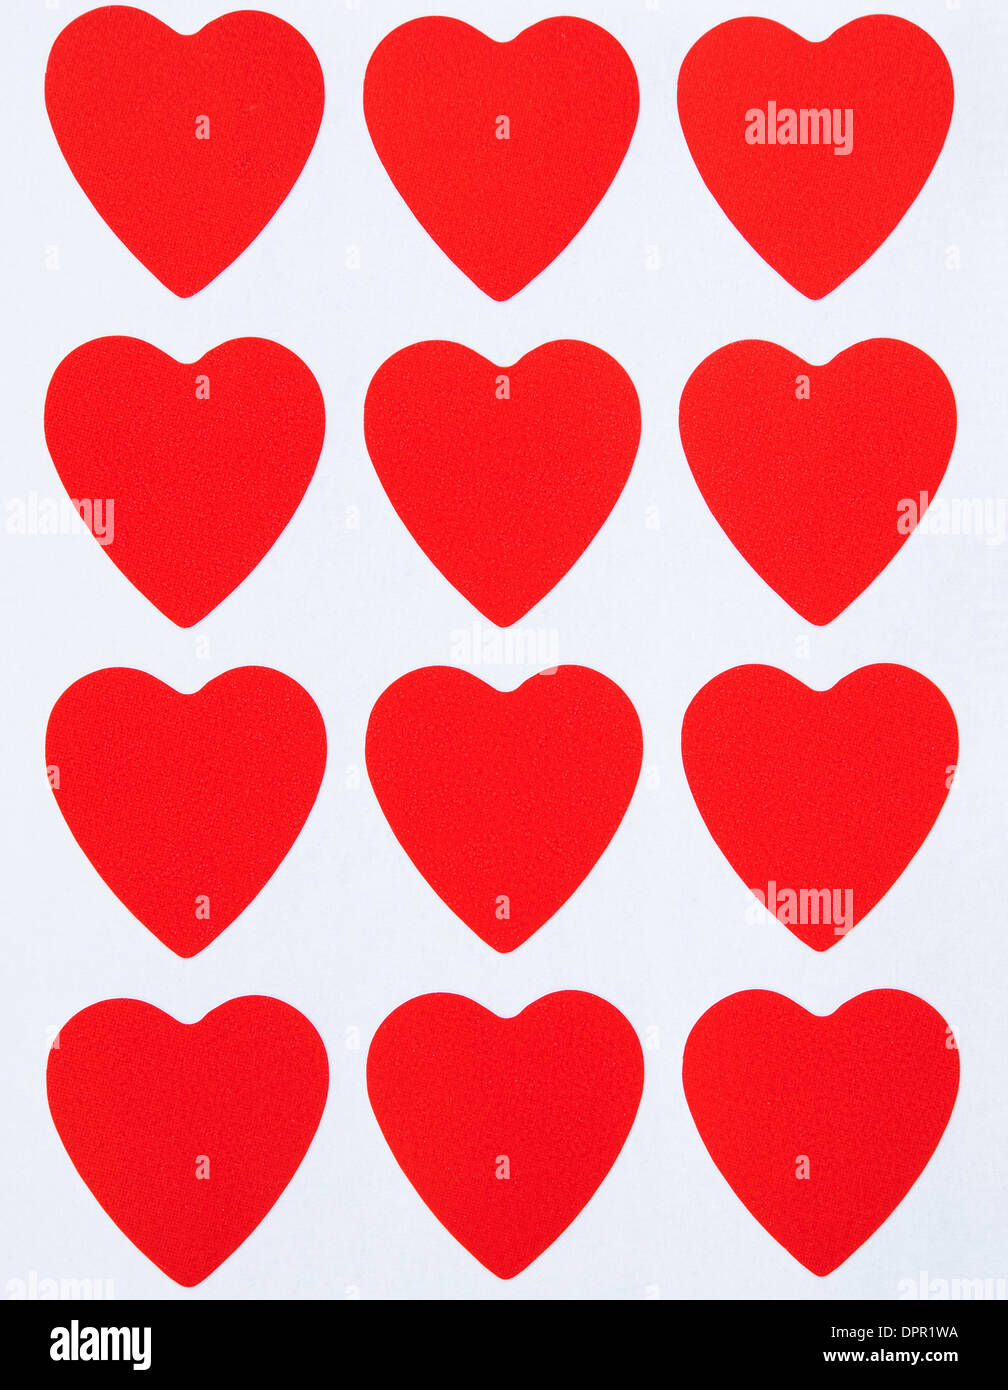 dozen of red hearts on the paper as background Stock Photo